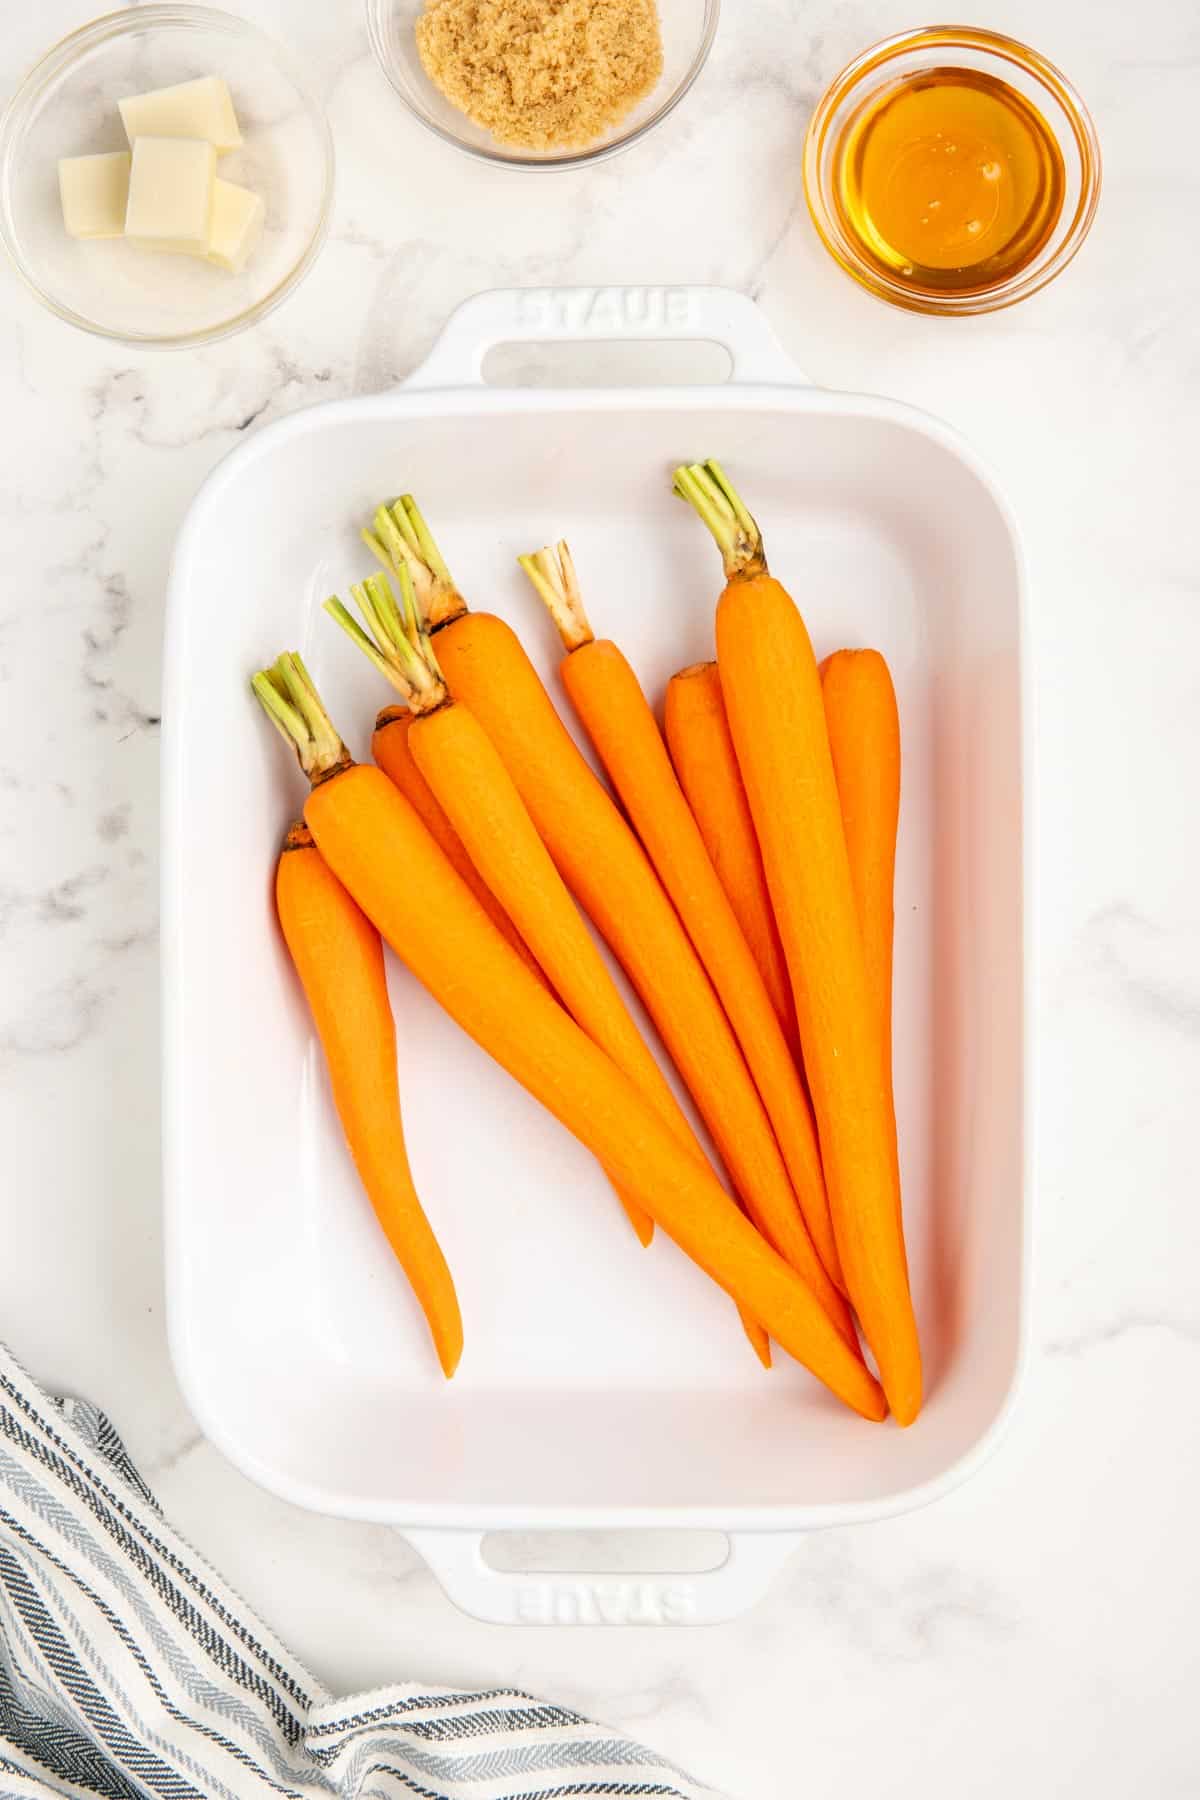 Raw carrots in a white baking dish with honey, brown sugar, and butter in glass bowls.